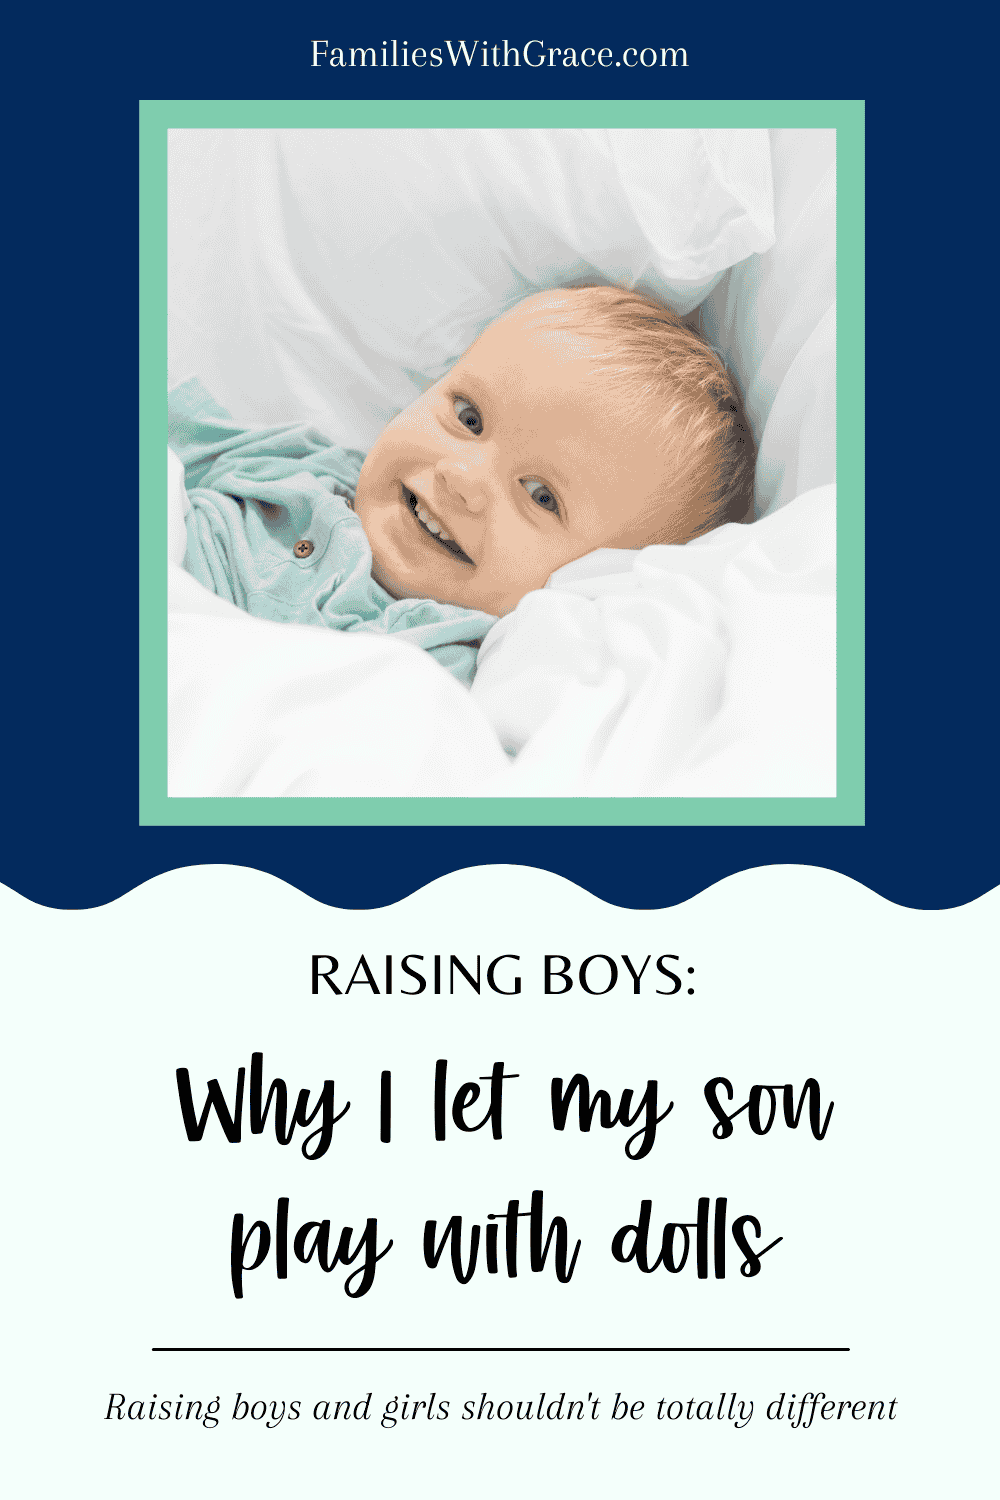 Raising boys: Why I let my son play with dolls